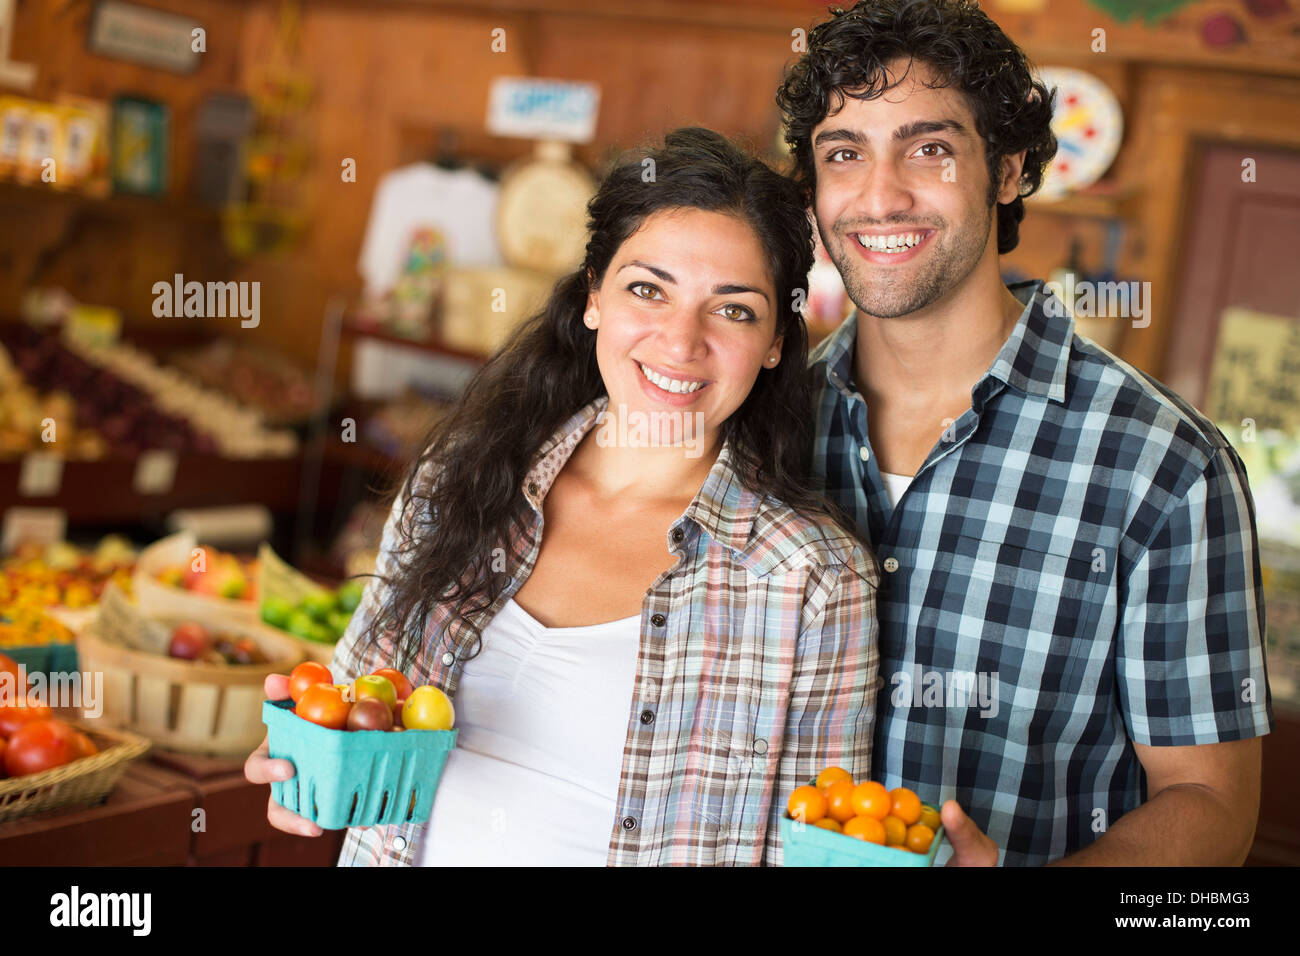 A farm growing and selling organic vegetables and fruit. A man and woman working together. Stock Photo